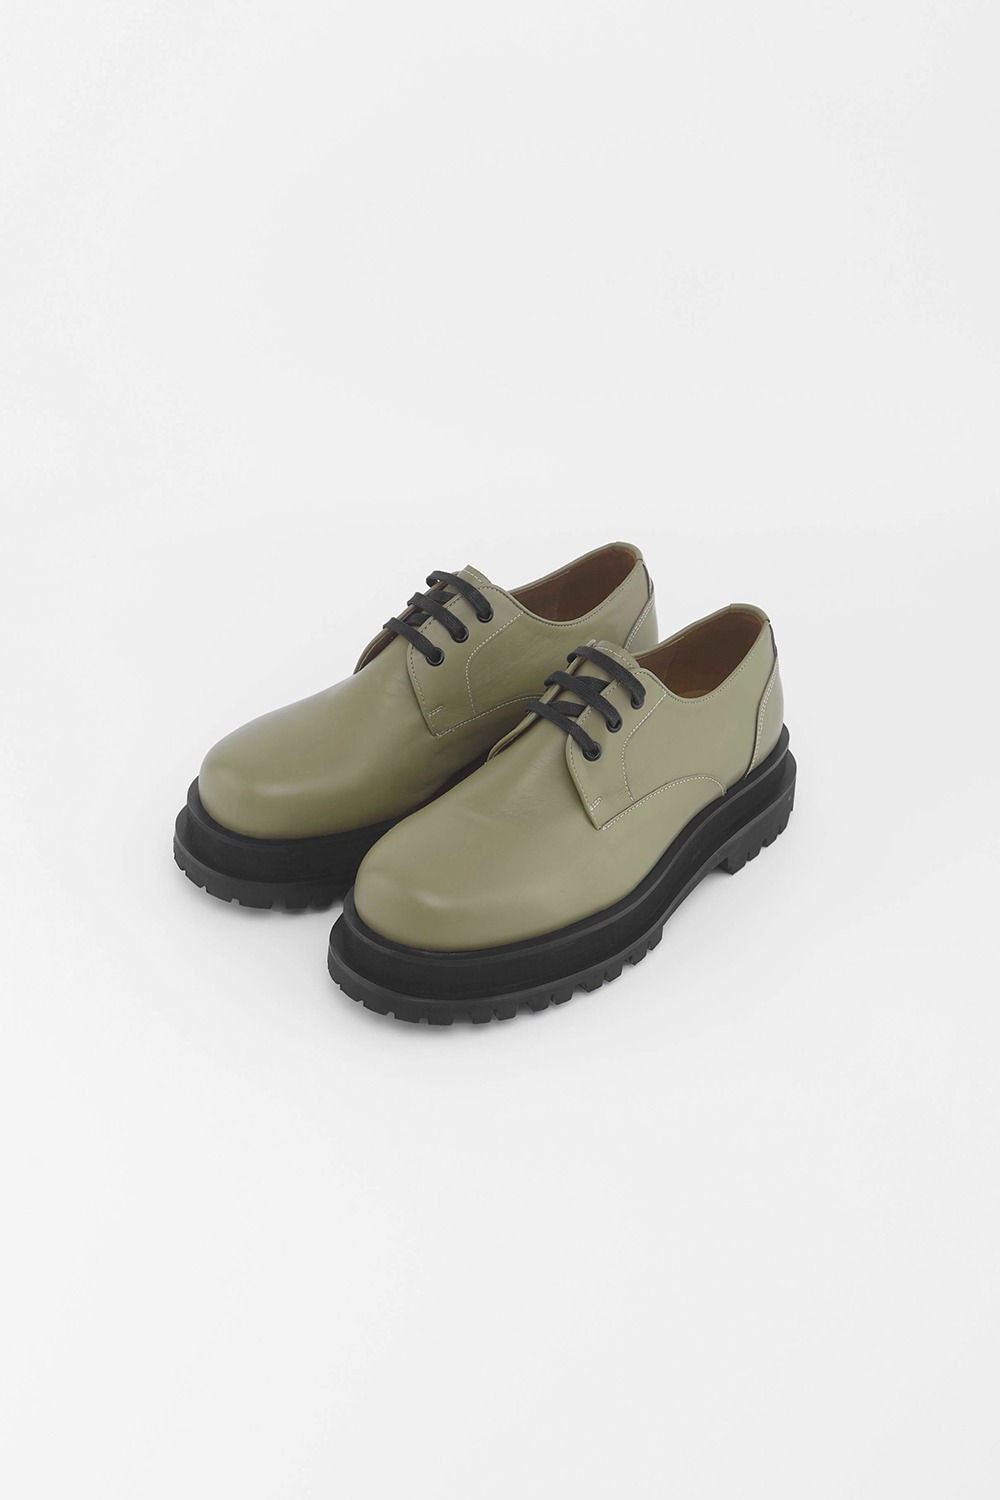 CHUNCKY OLIVE DERBY SHOES